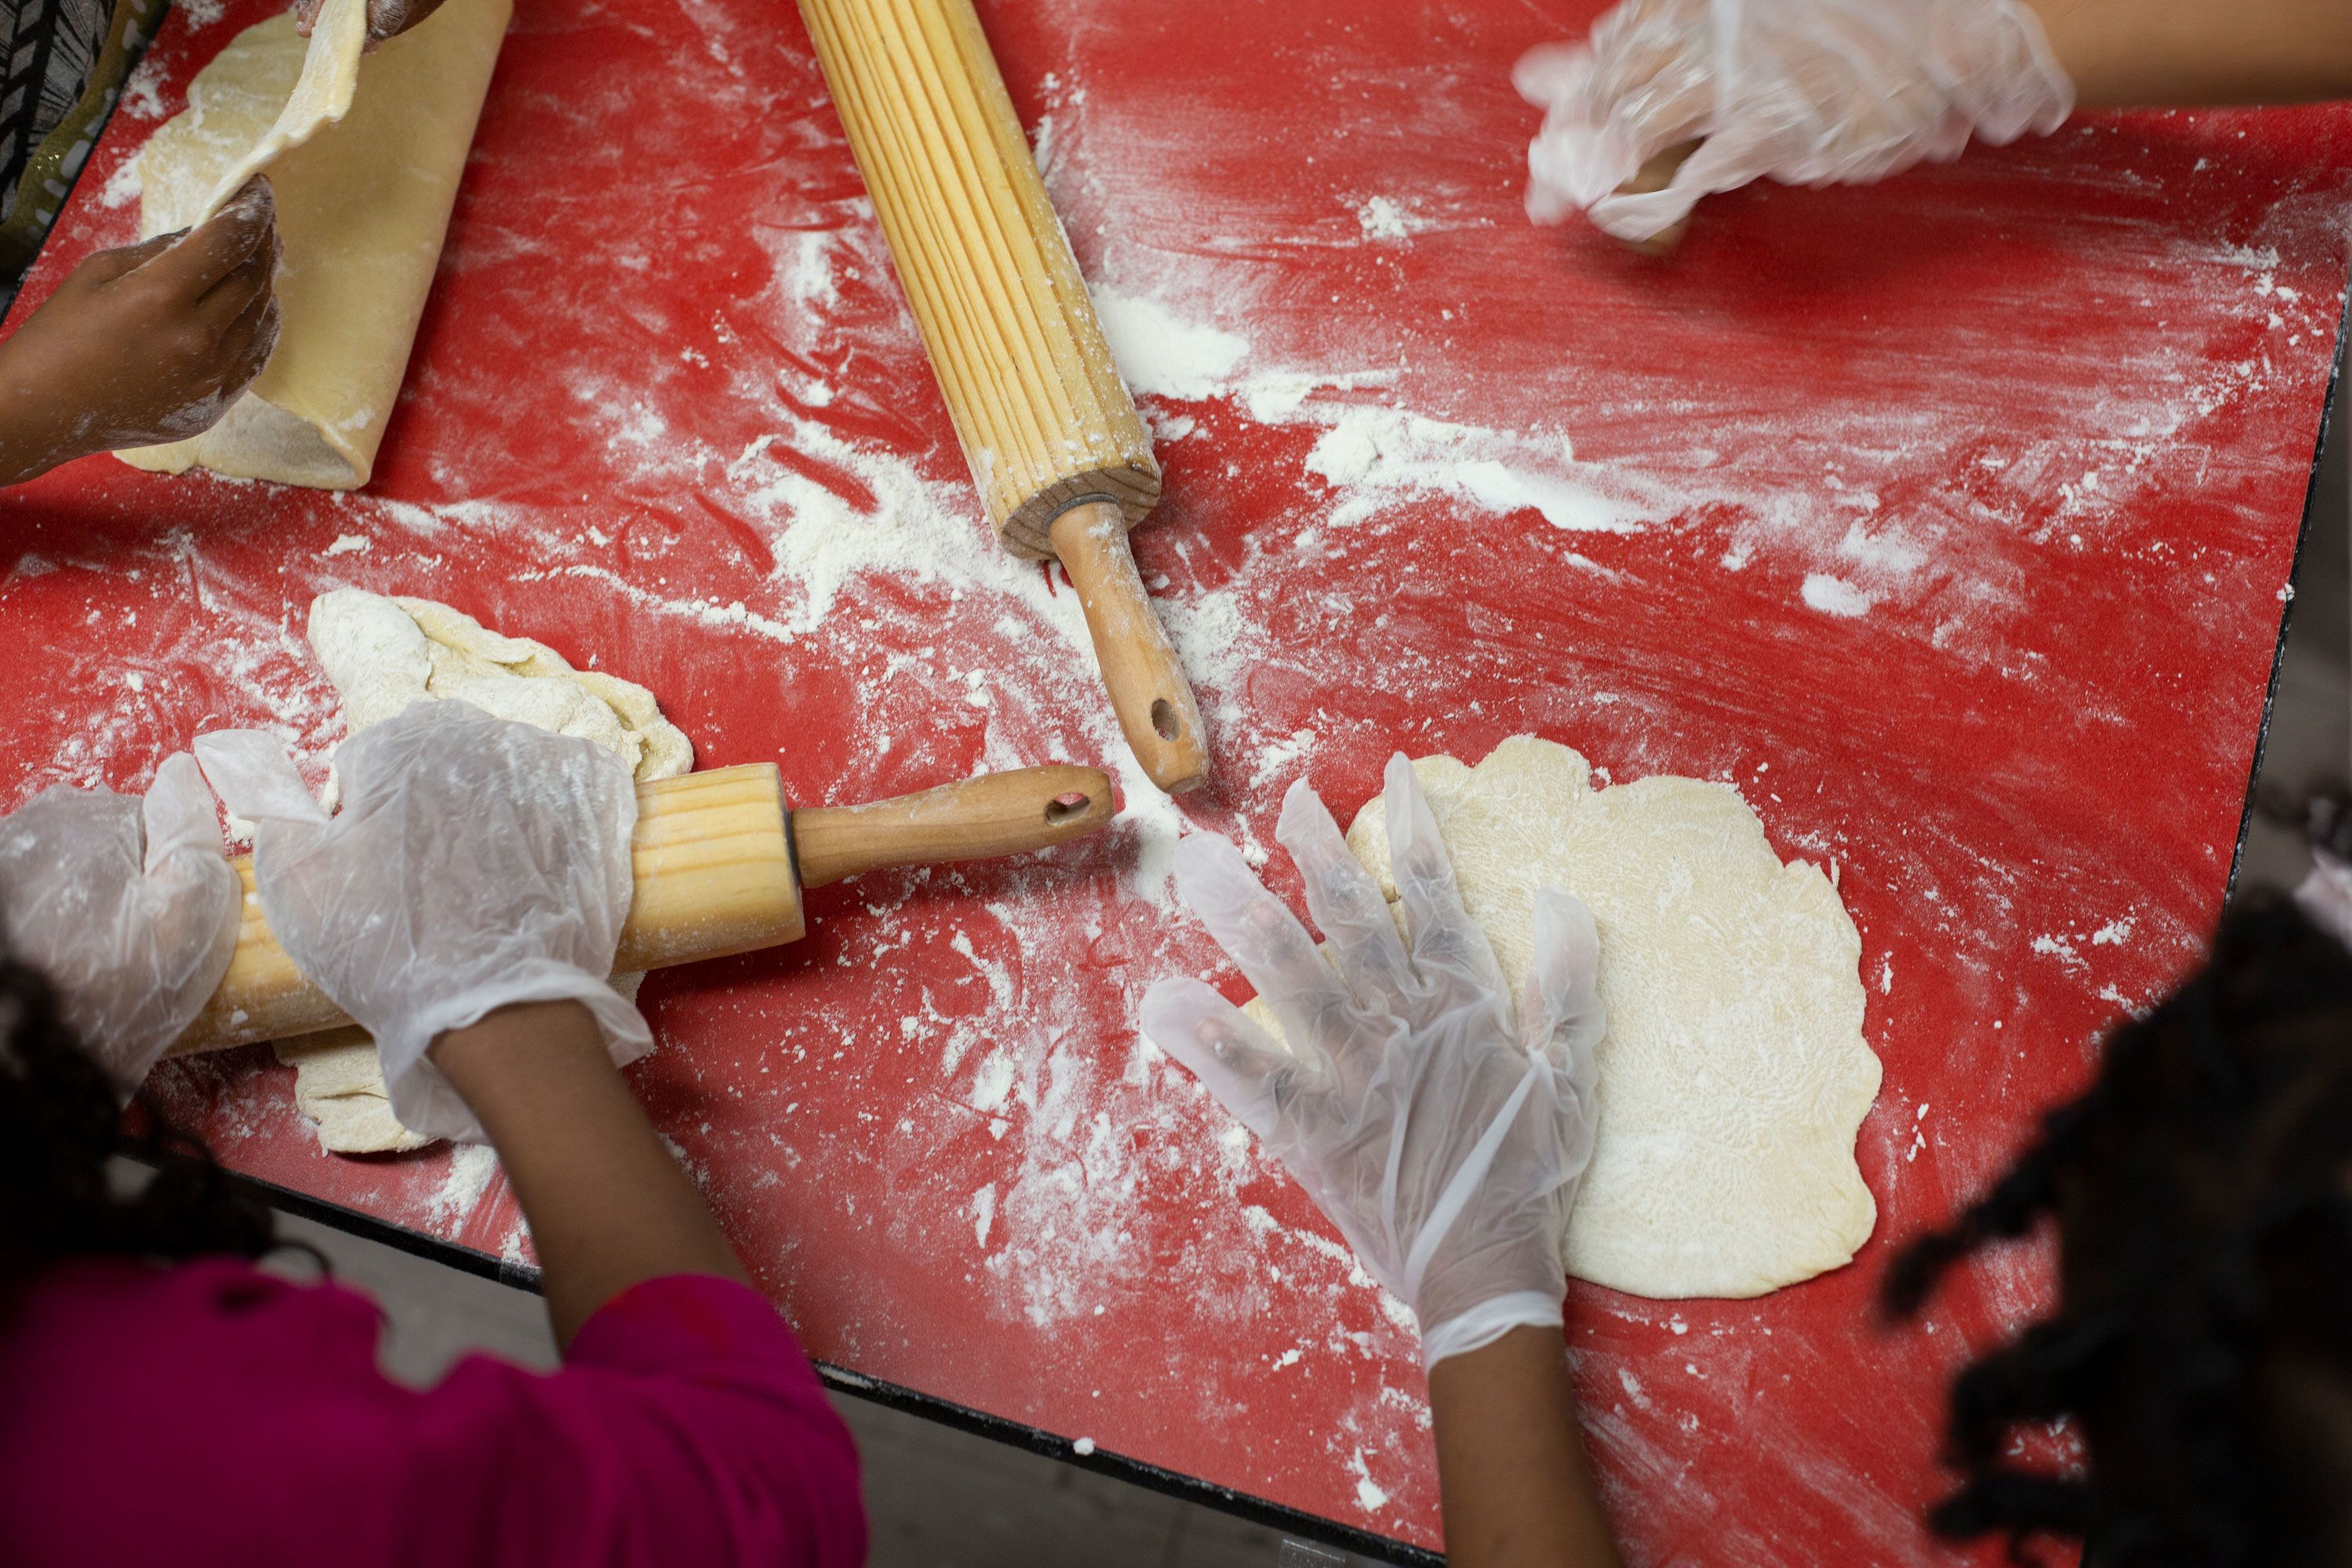 Children help make pies for the homeless at Robert F. Wagner Middle School in New York City, on November 18.